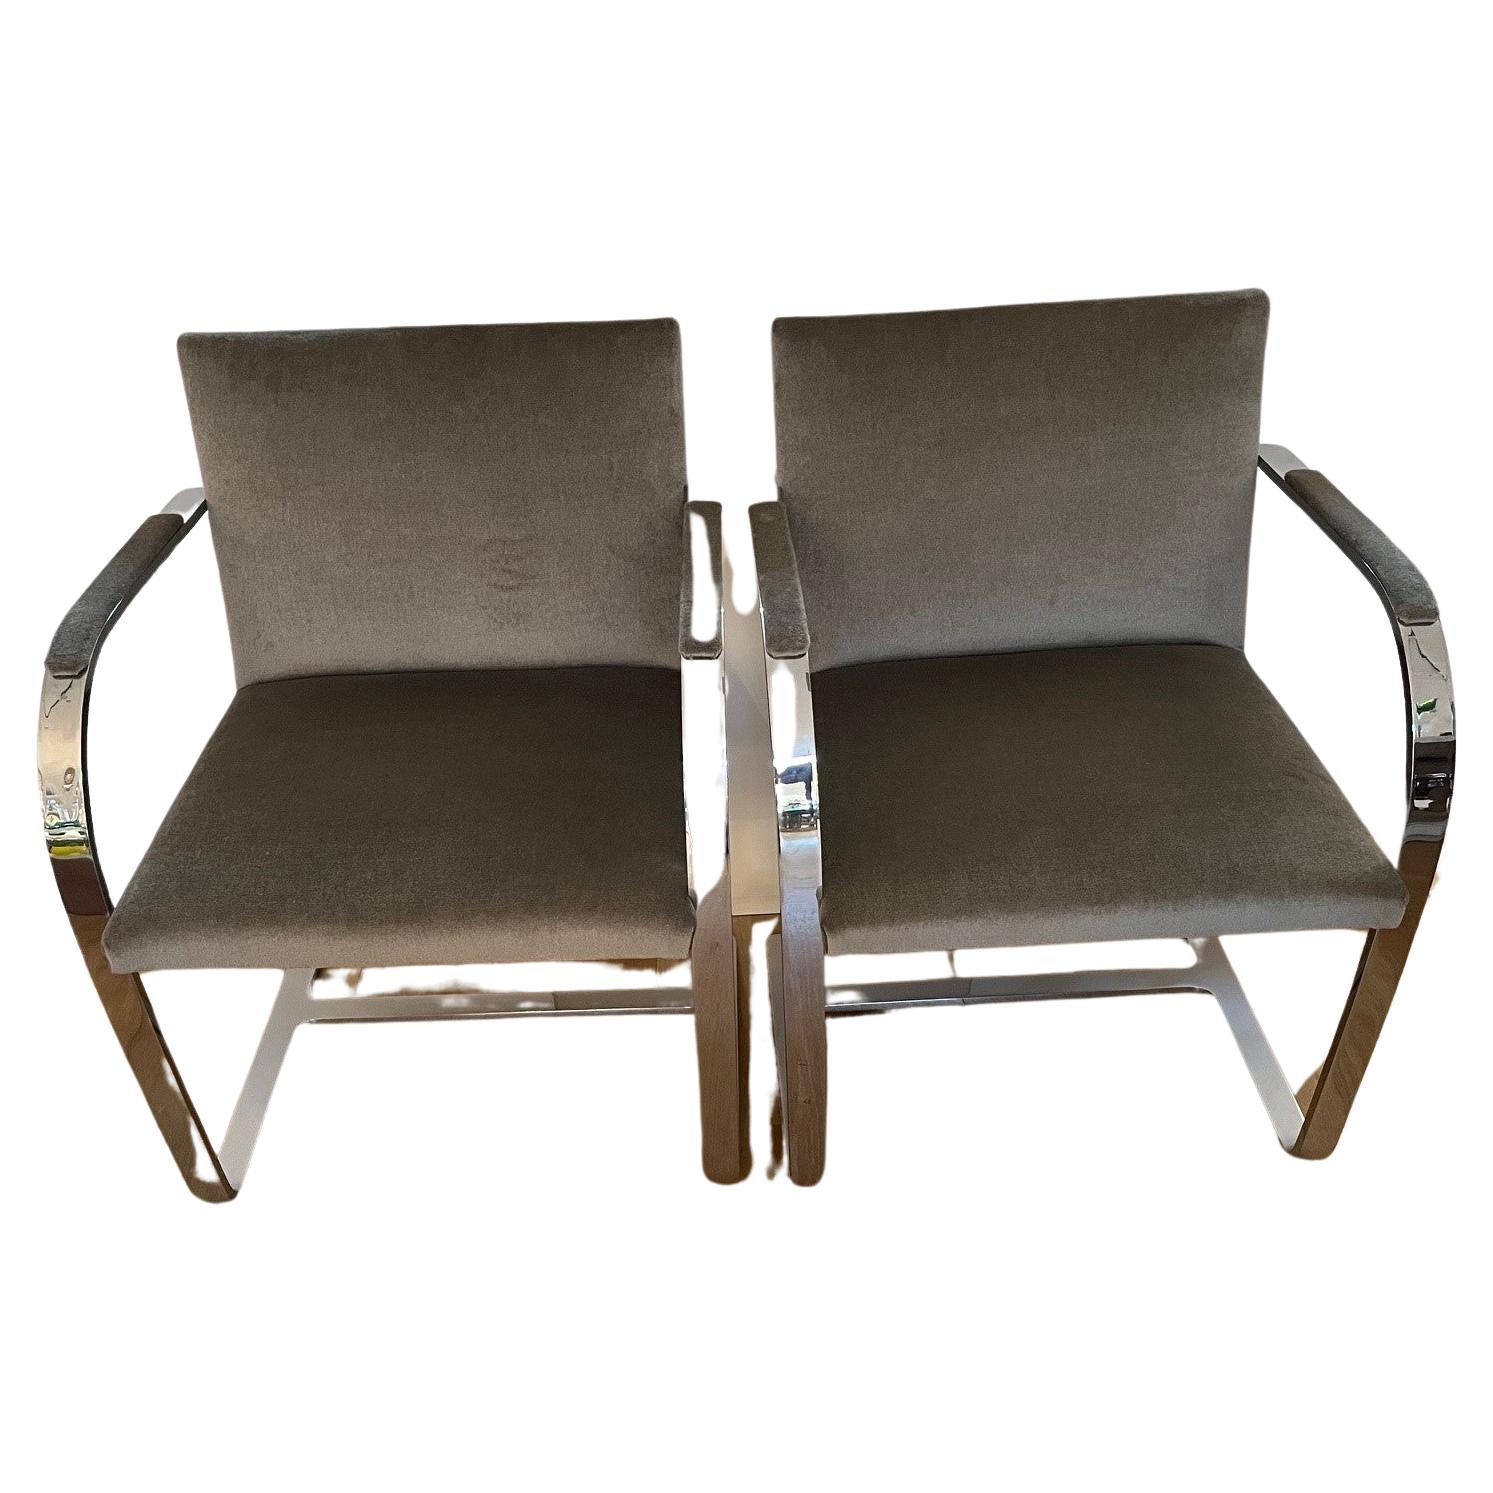 Vintage Pair of Knoll Brno Flat Bar Chairs by Ludwig Mies Van Der Rohe 